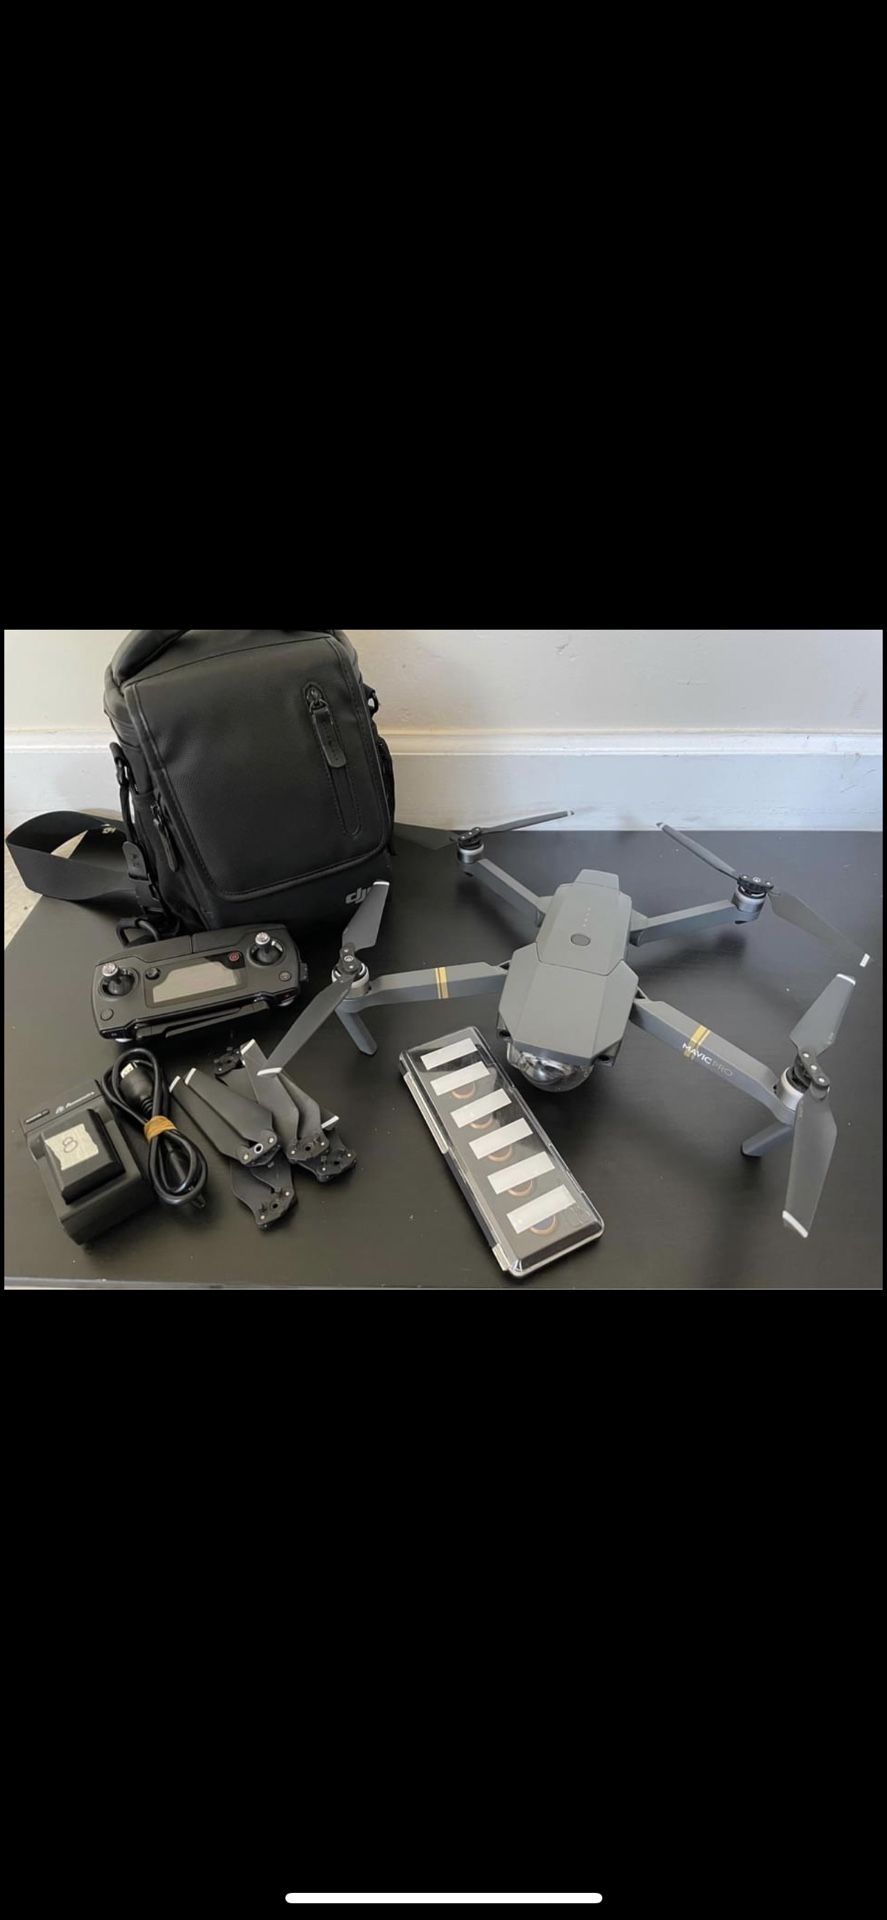 Mavic Pro Fly More Combo With Extras‼️‼️‼️